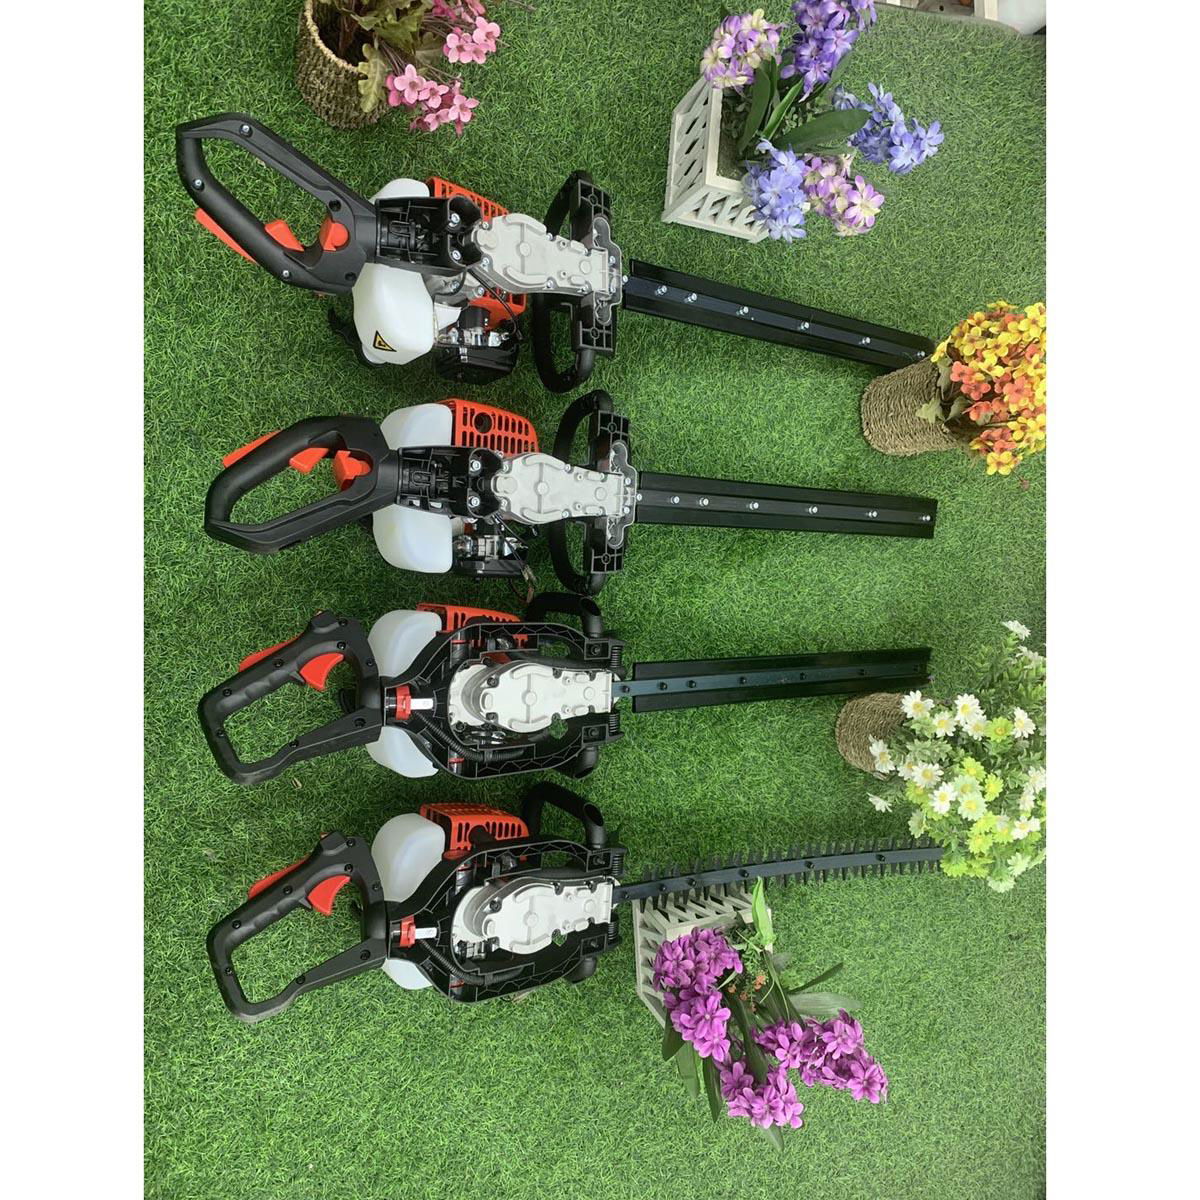 Garden machinery Double-edged blade Hedge trimmers, tea tree trimmers 5